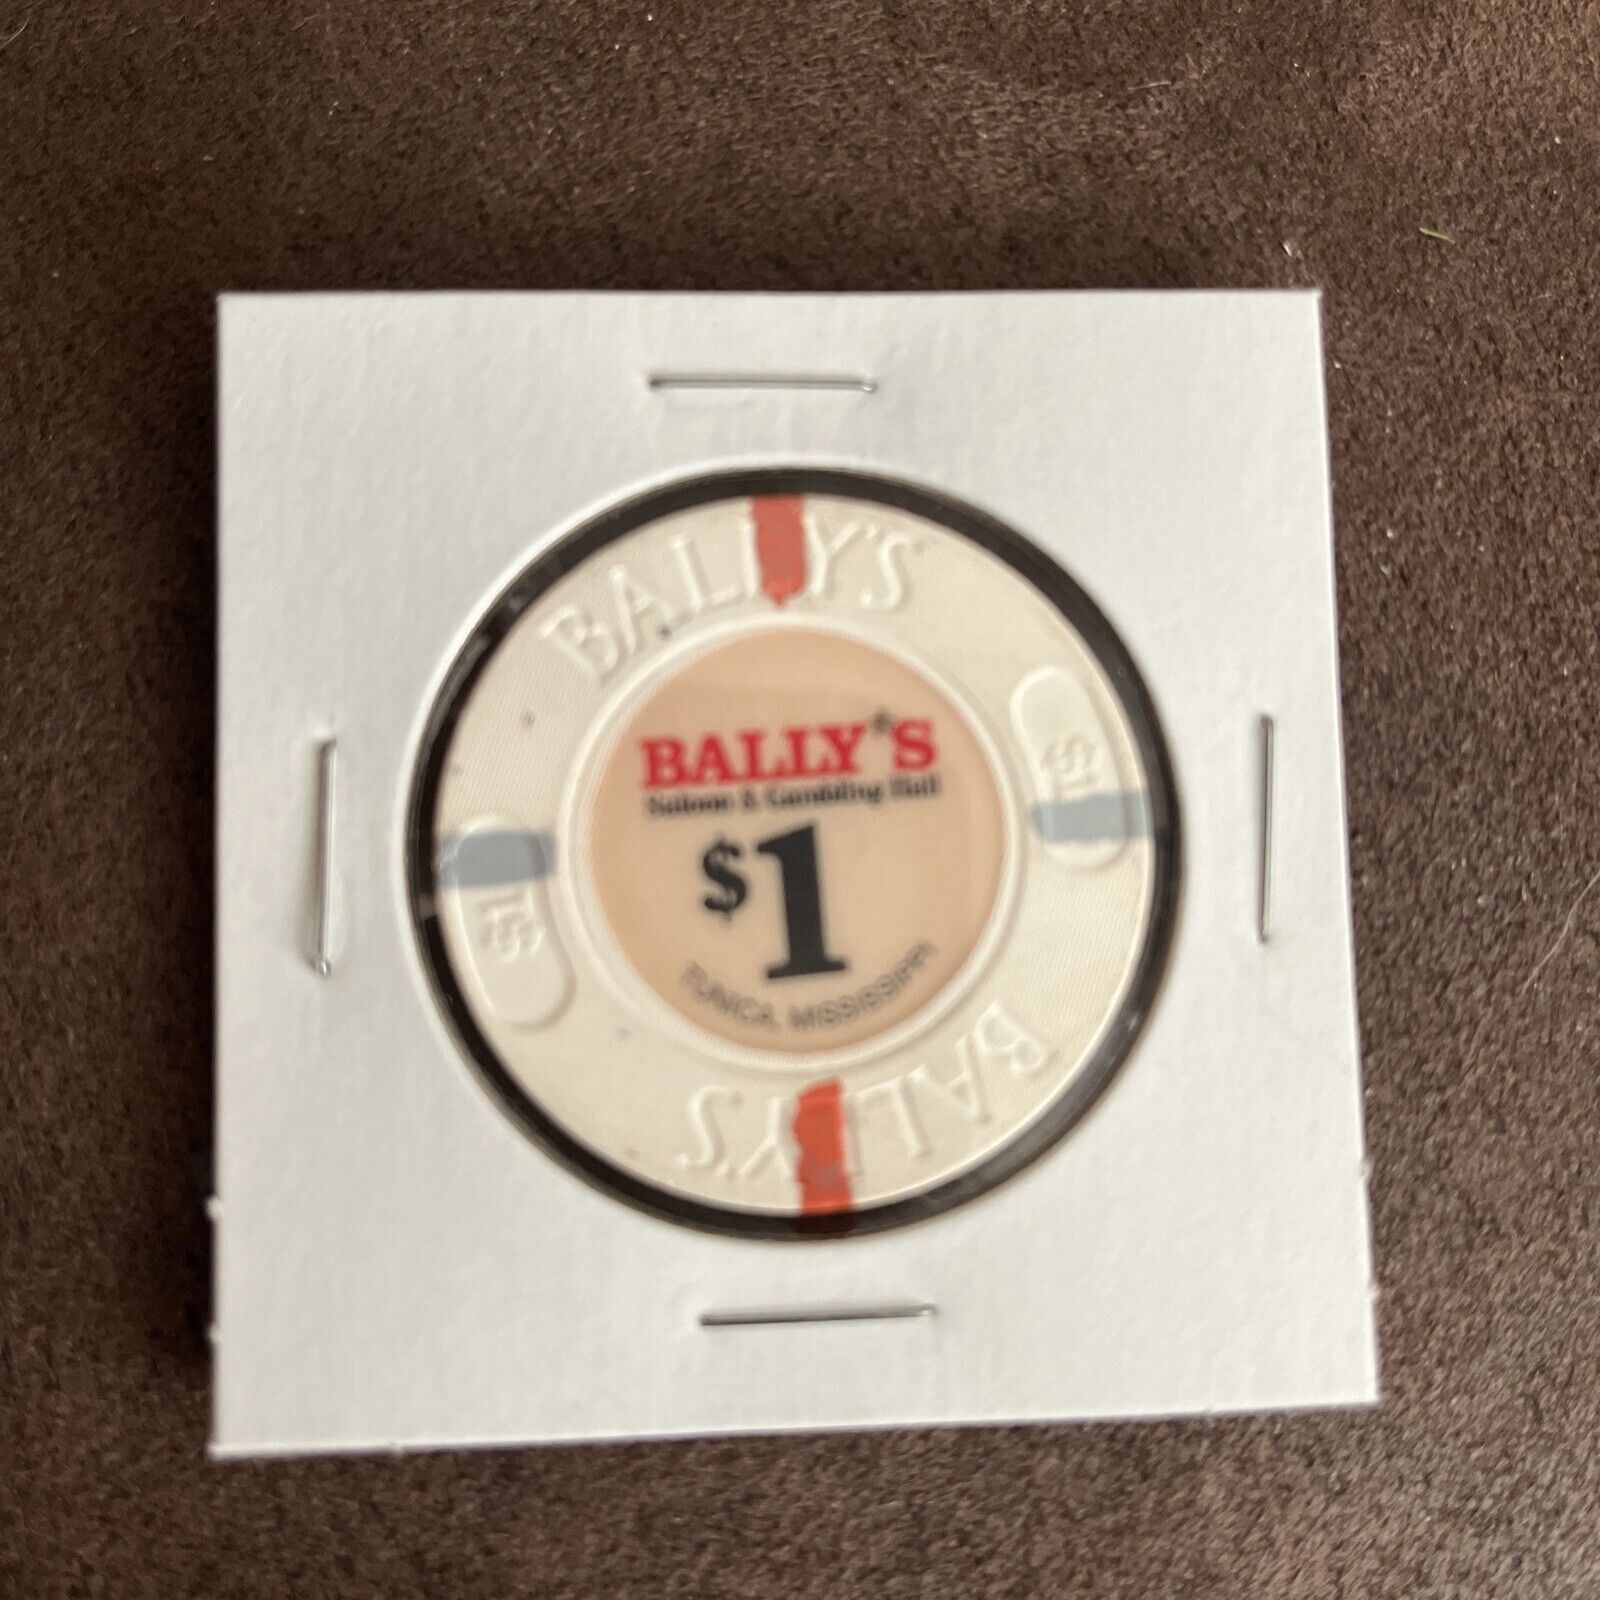 $1 BALLY\'S SALOON & GAMBLING HALL  Casino Chip - Tunica, Mississippi MS Obsolete